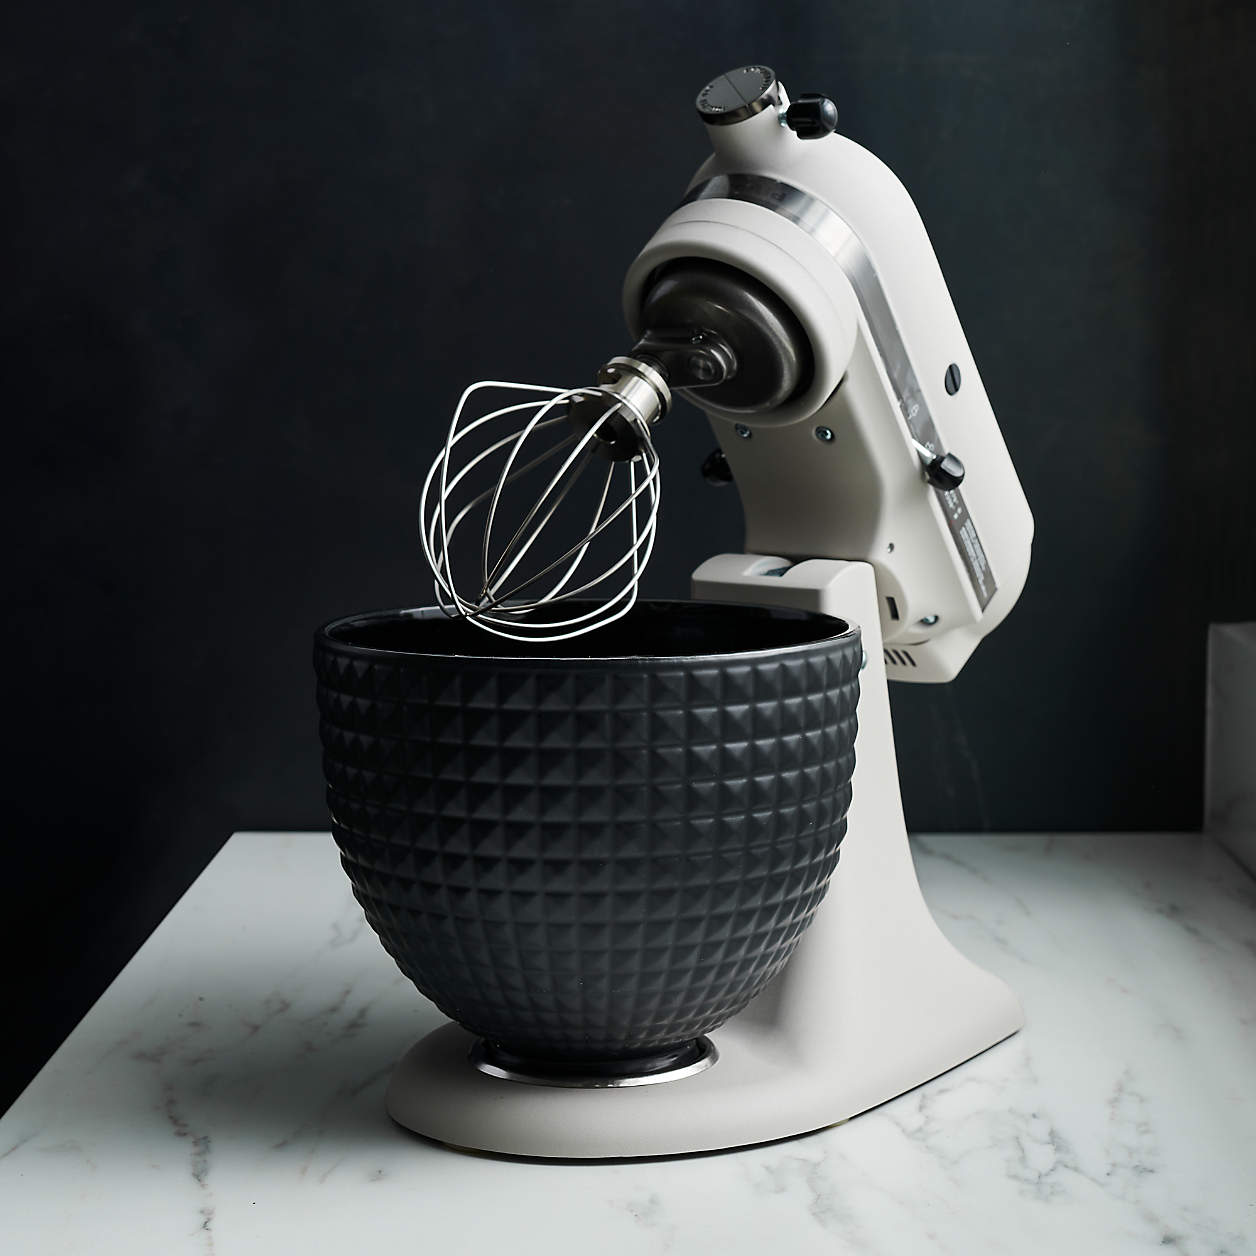 KitchenAid Is Making Studded Mixing Bowls For Badass Bakers